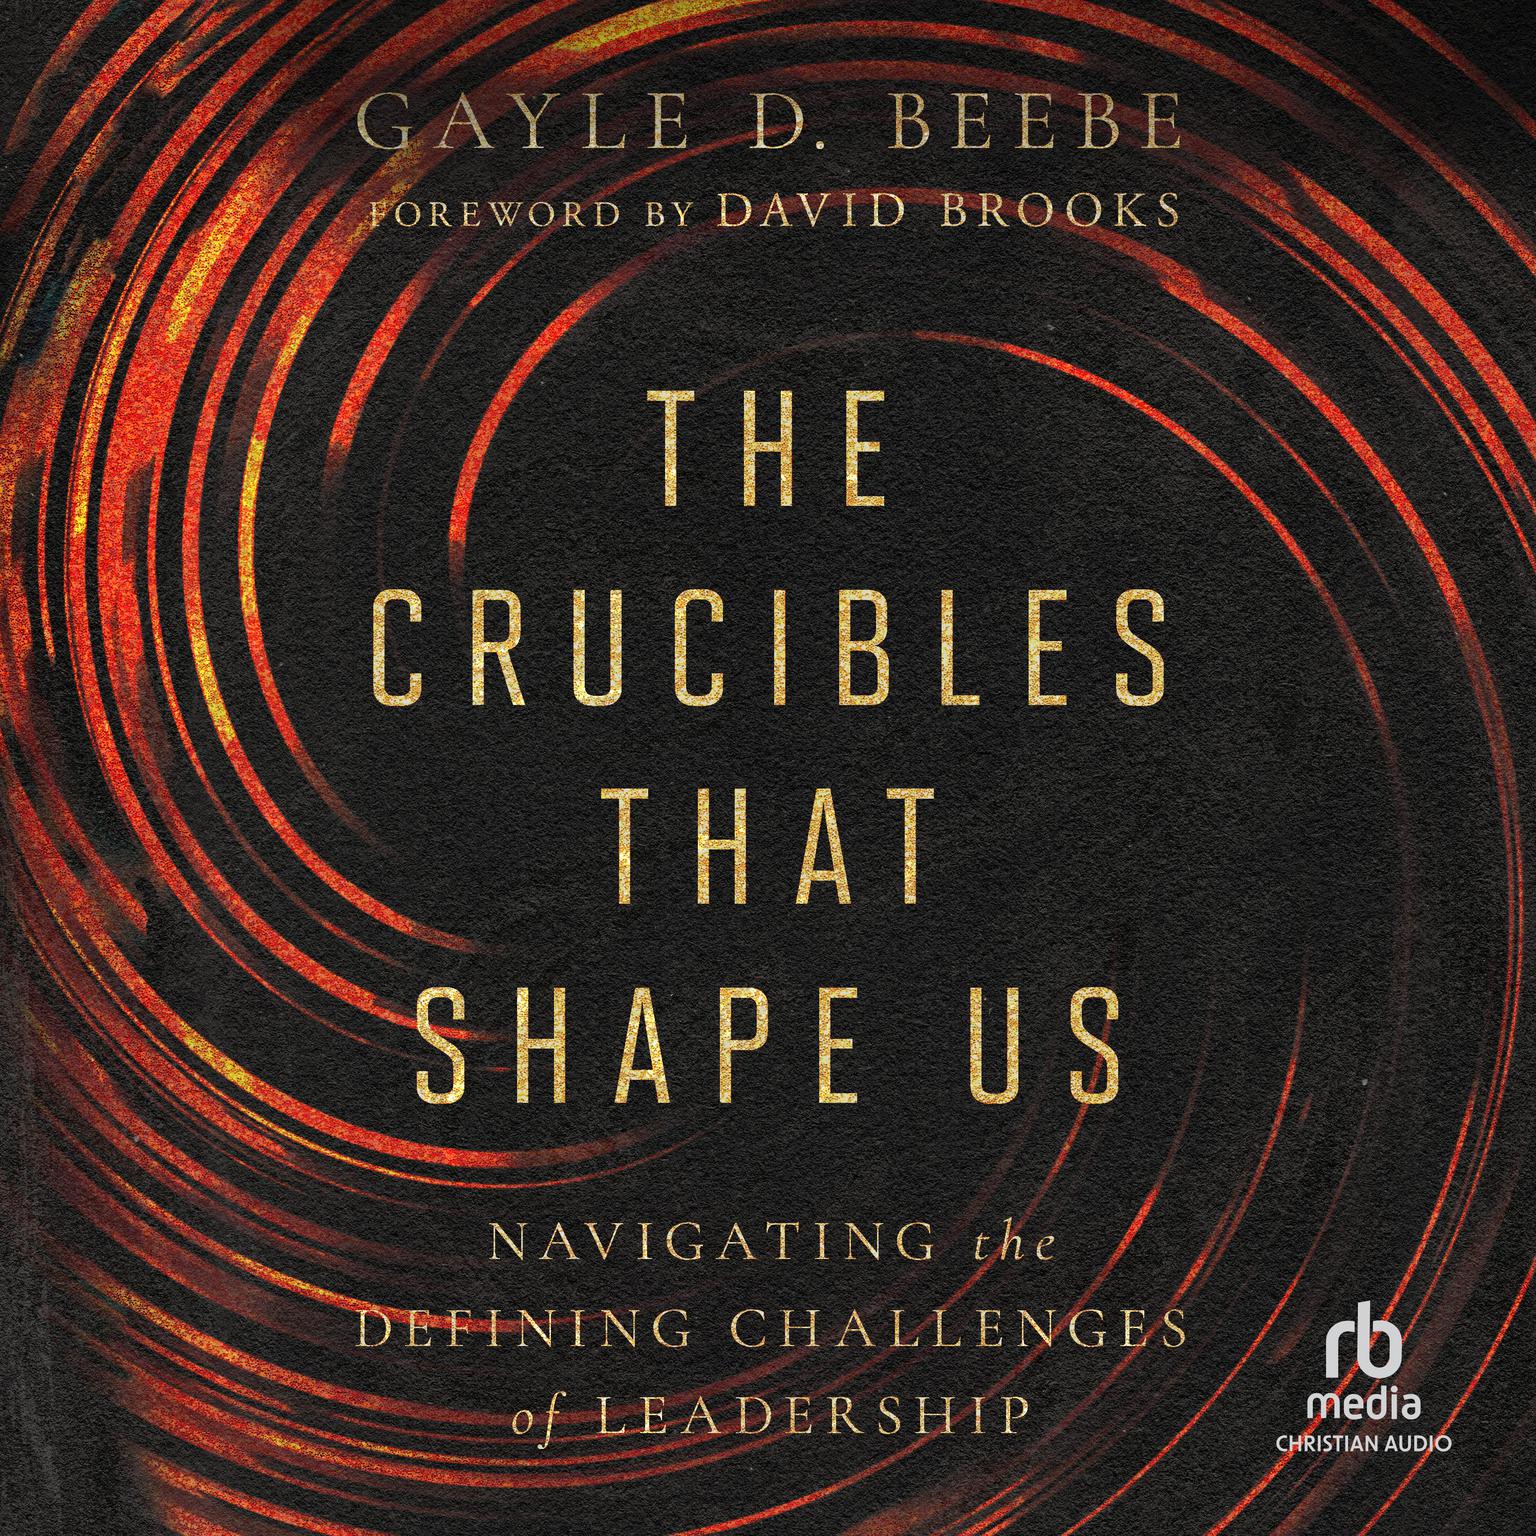 The Crucibles That Shape Us: Navigating the Defining Challenges of Leadership Audiobook, by Gayle D. Beebe